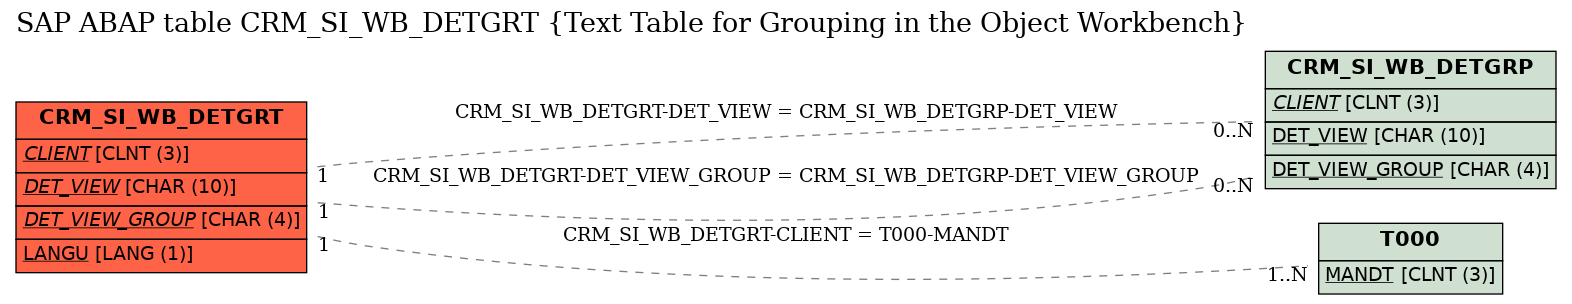 E-R Diagram for table CRM_SI_WB_DETGRT (Text Table for Grouping in the Object Workbench)